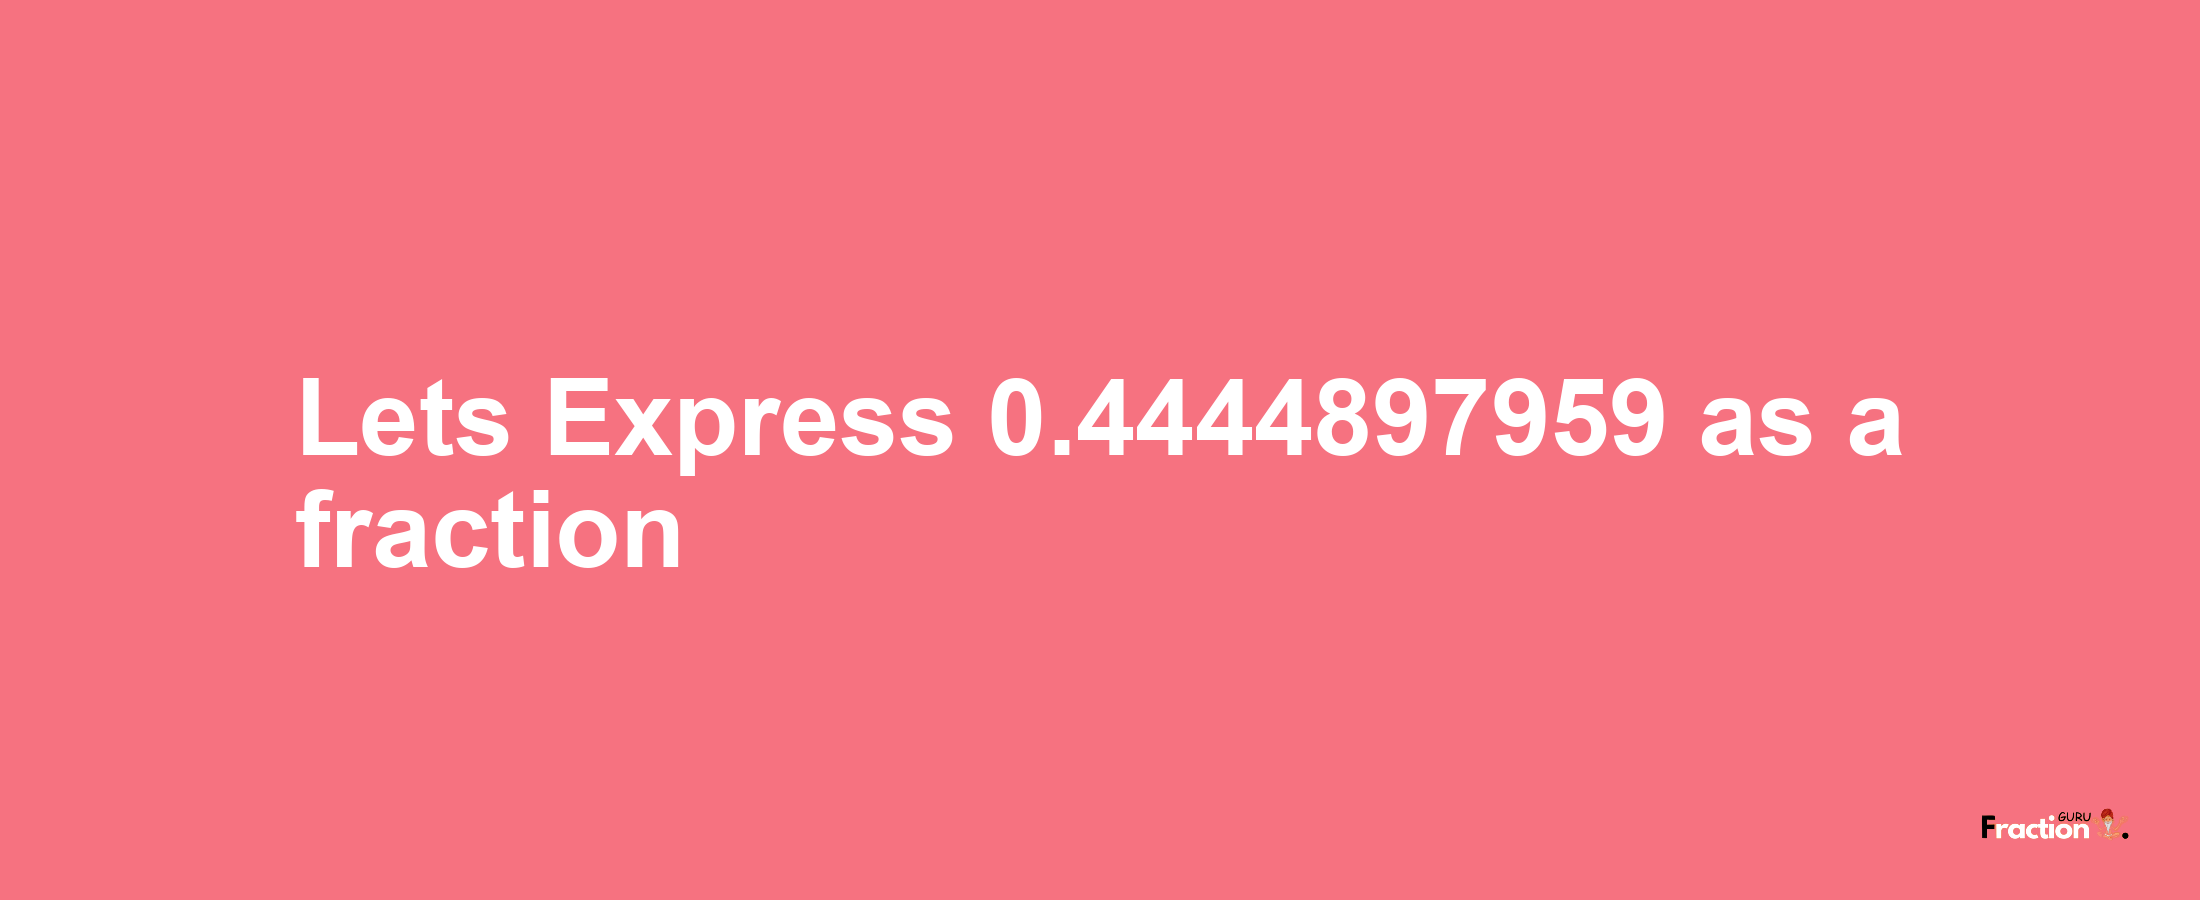 Lets Express 0.4444897959 as afraction